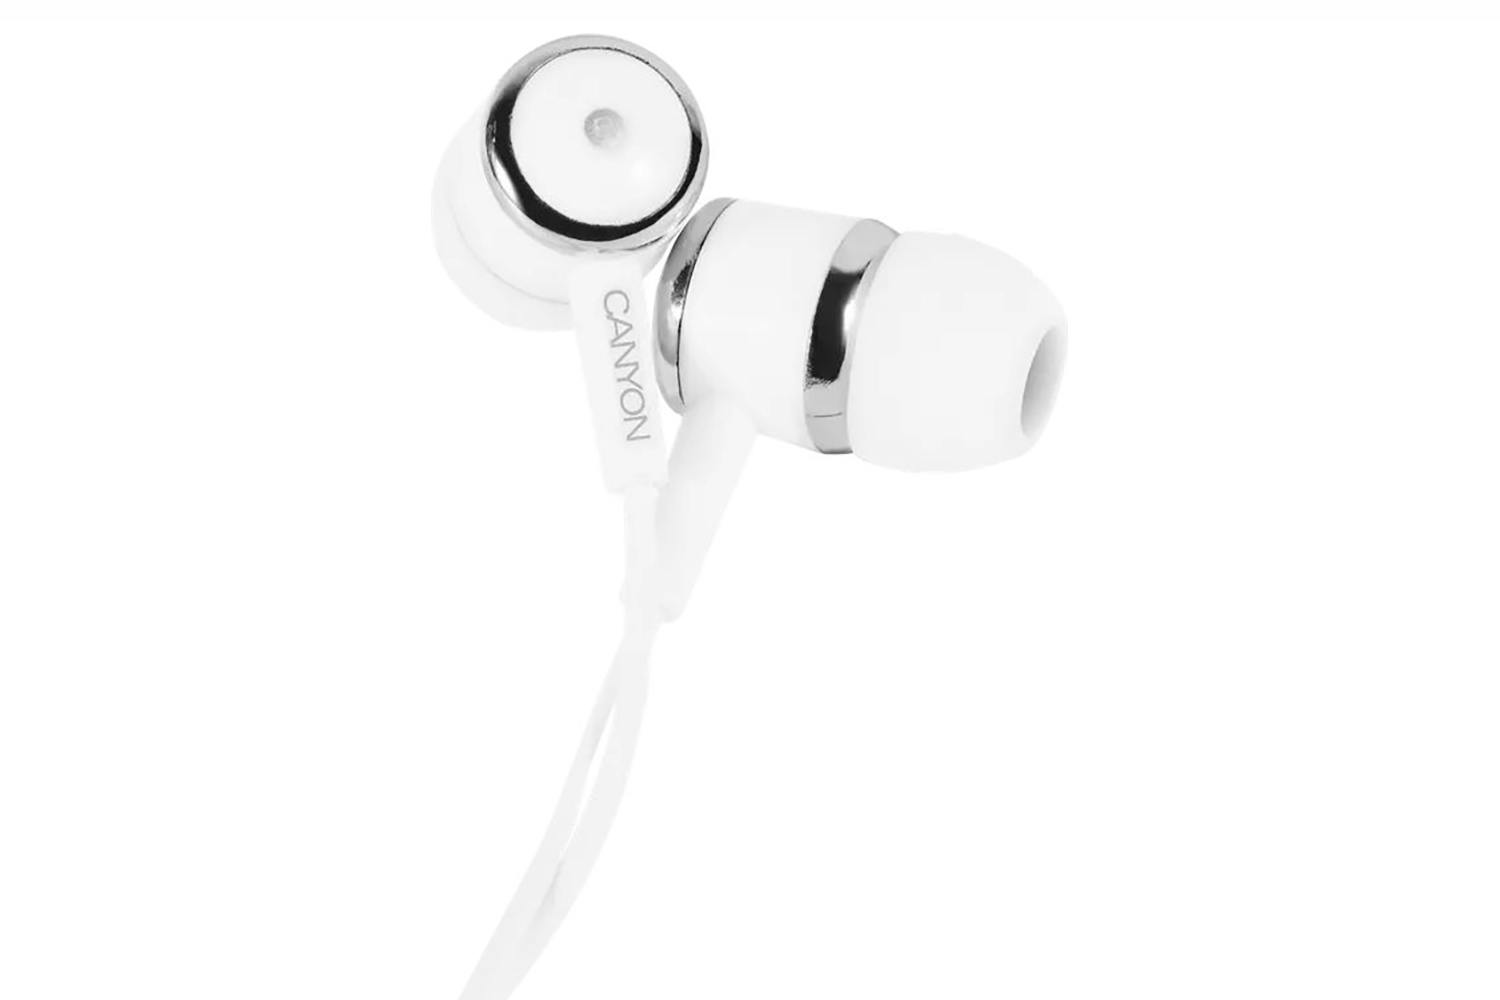 Canyon EPM-01 In-Ear Stereo Headphones with Mic | White